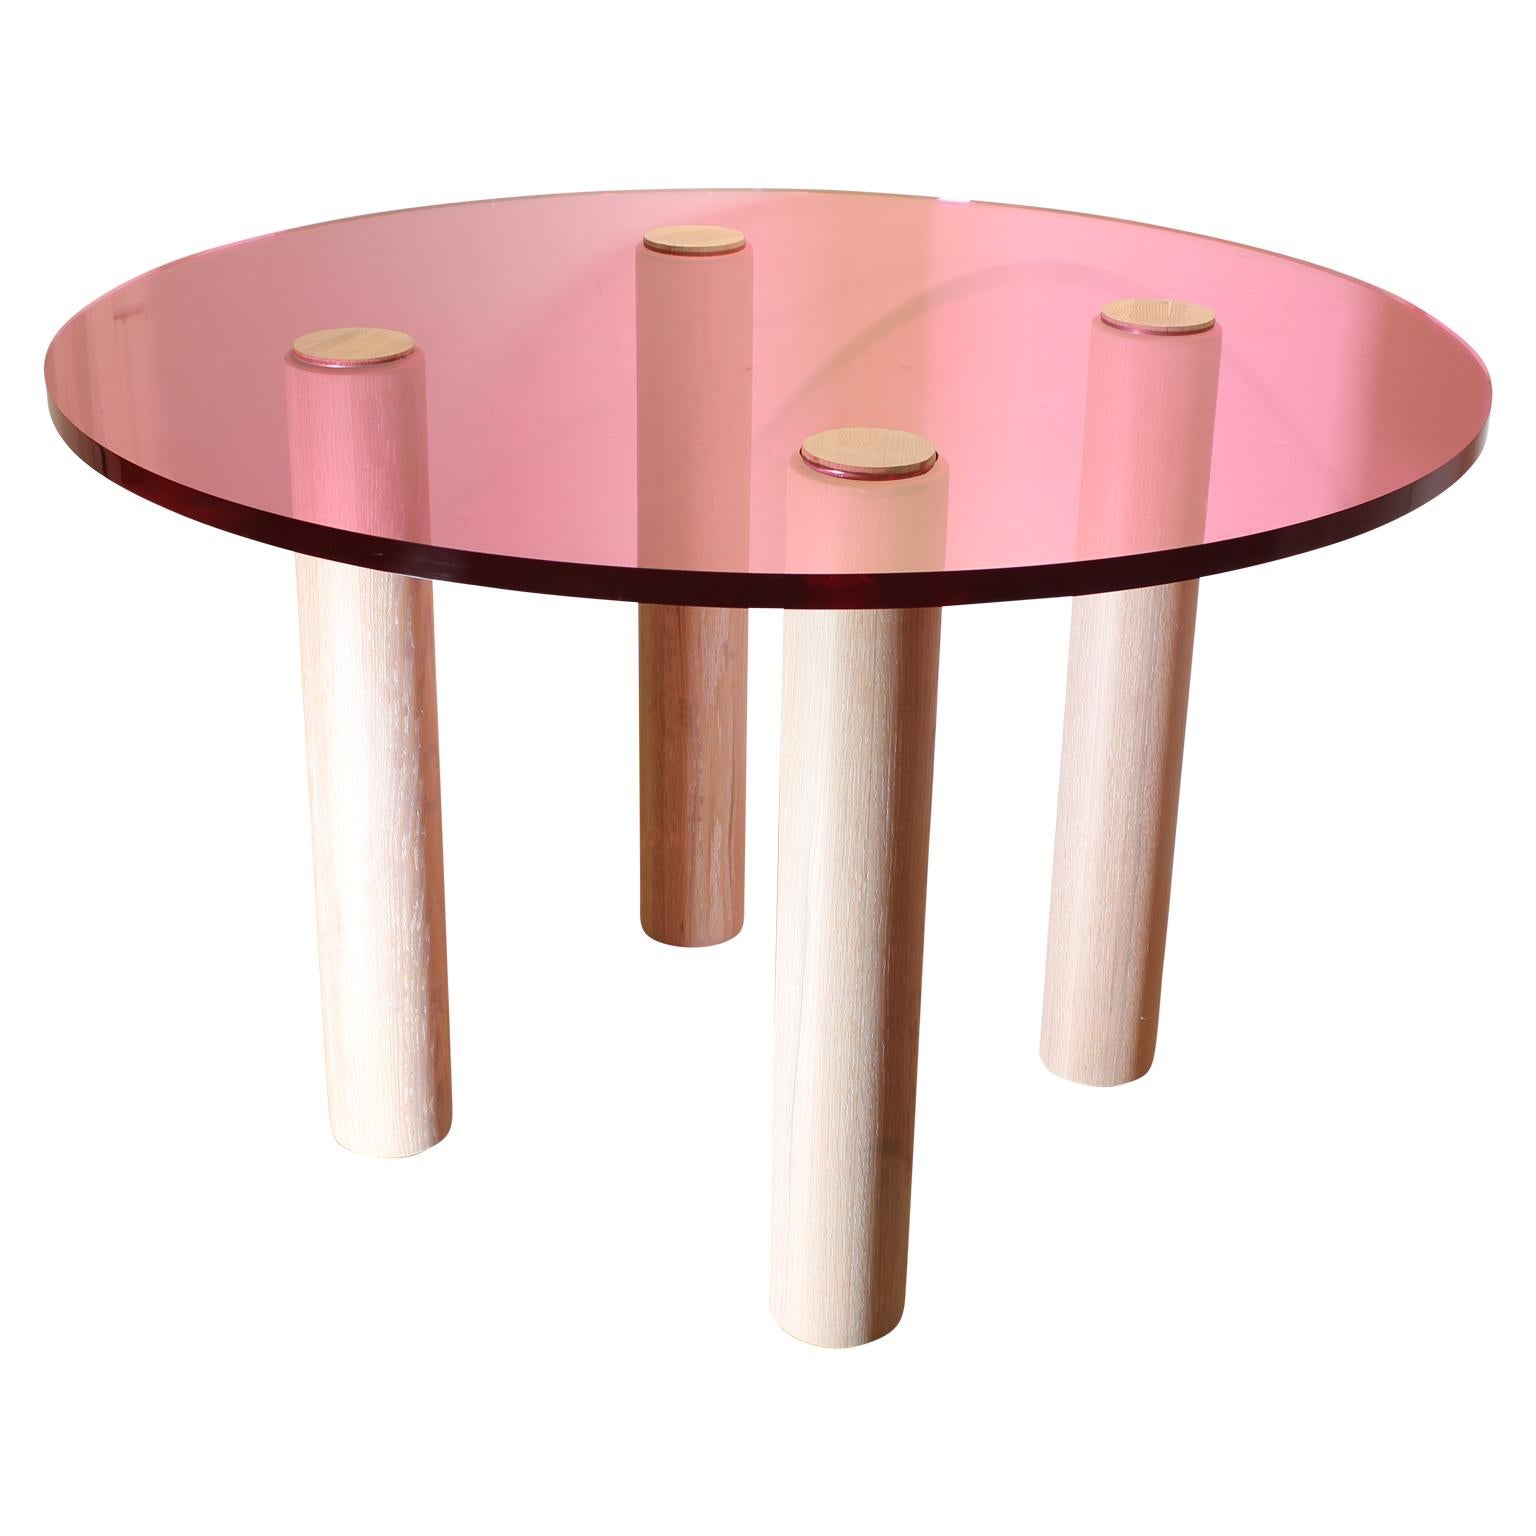 Custom pink Lucite table in a modern style. The four legs are white oak with a white cerused finish. We can custom make other size and colored Lucite tables. For more details message us.
Another example of Reeves Art & Design custom tables is